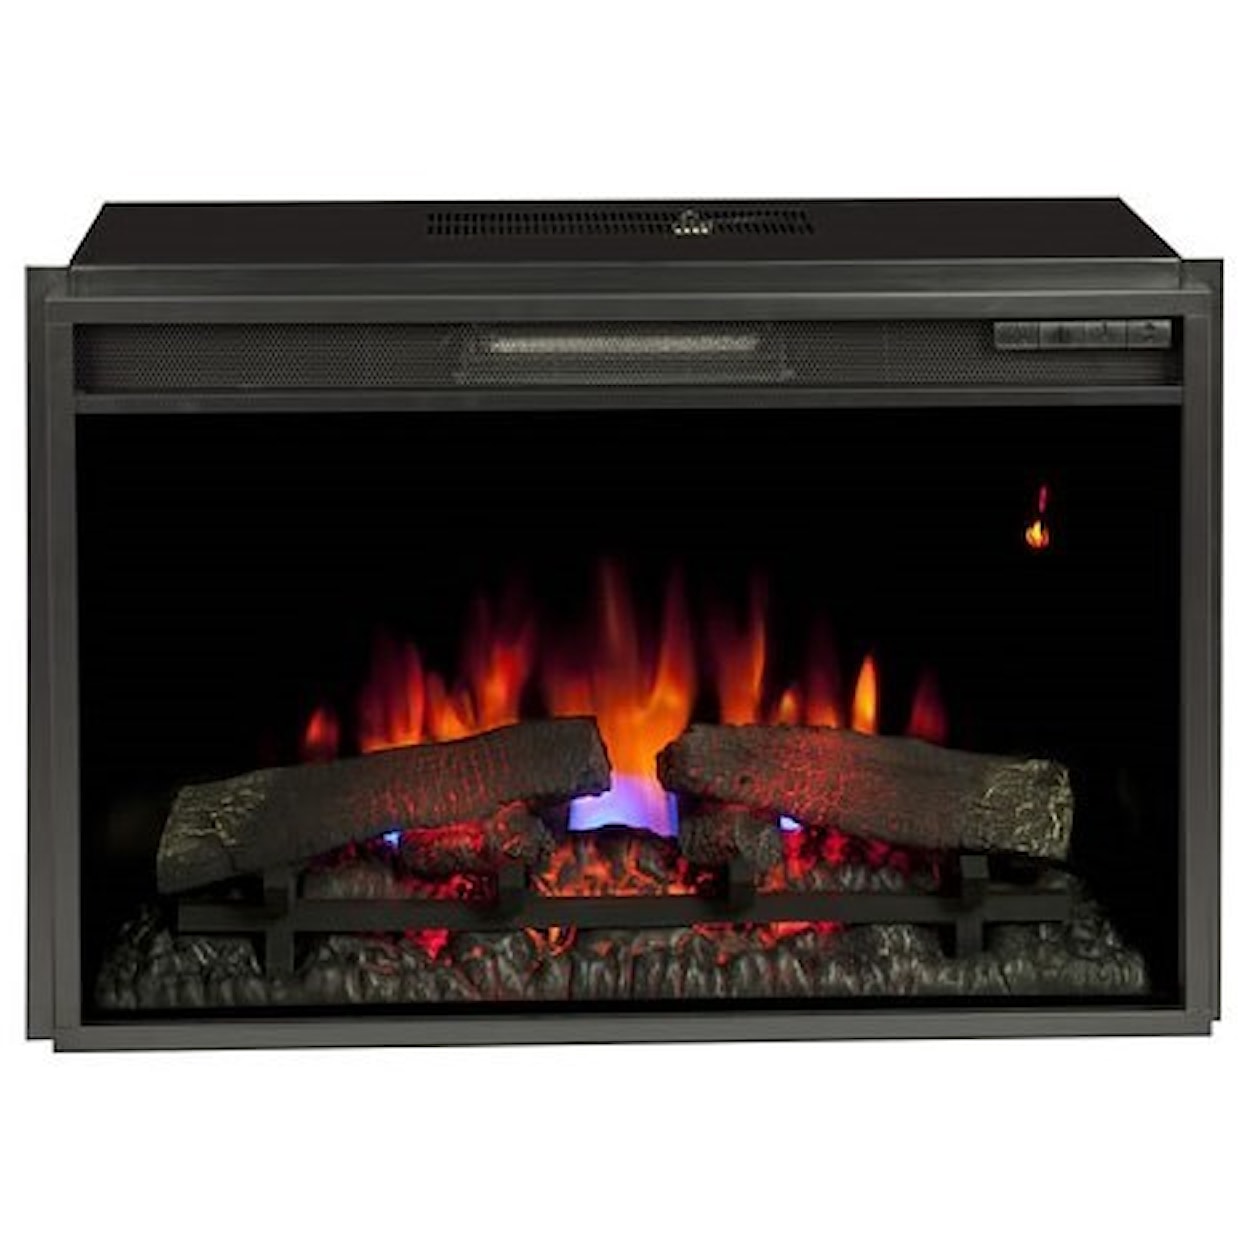 ClassicFlame Fireplace Inserts 26" Fireplace Electric Insert